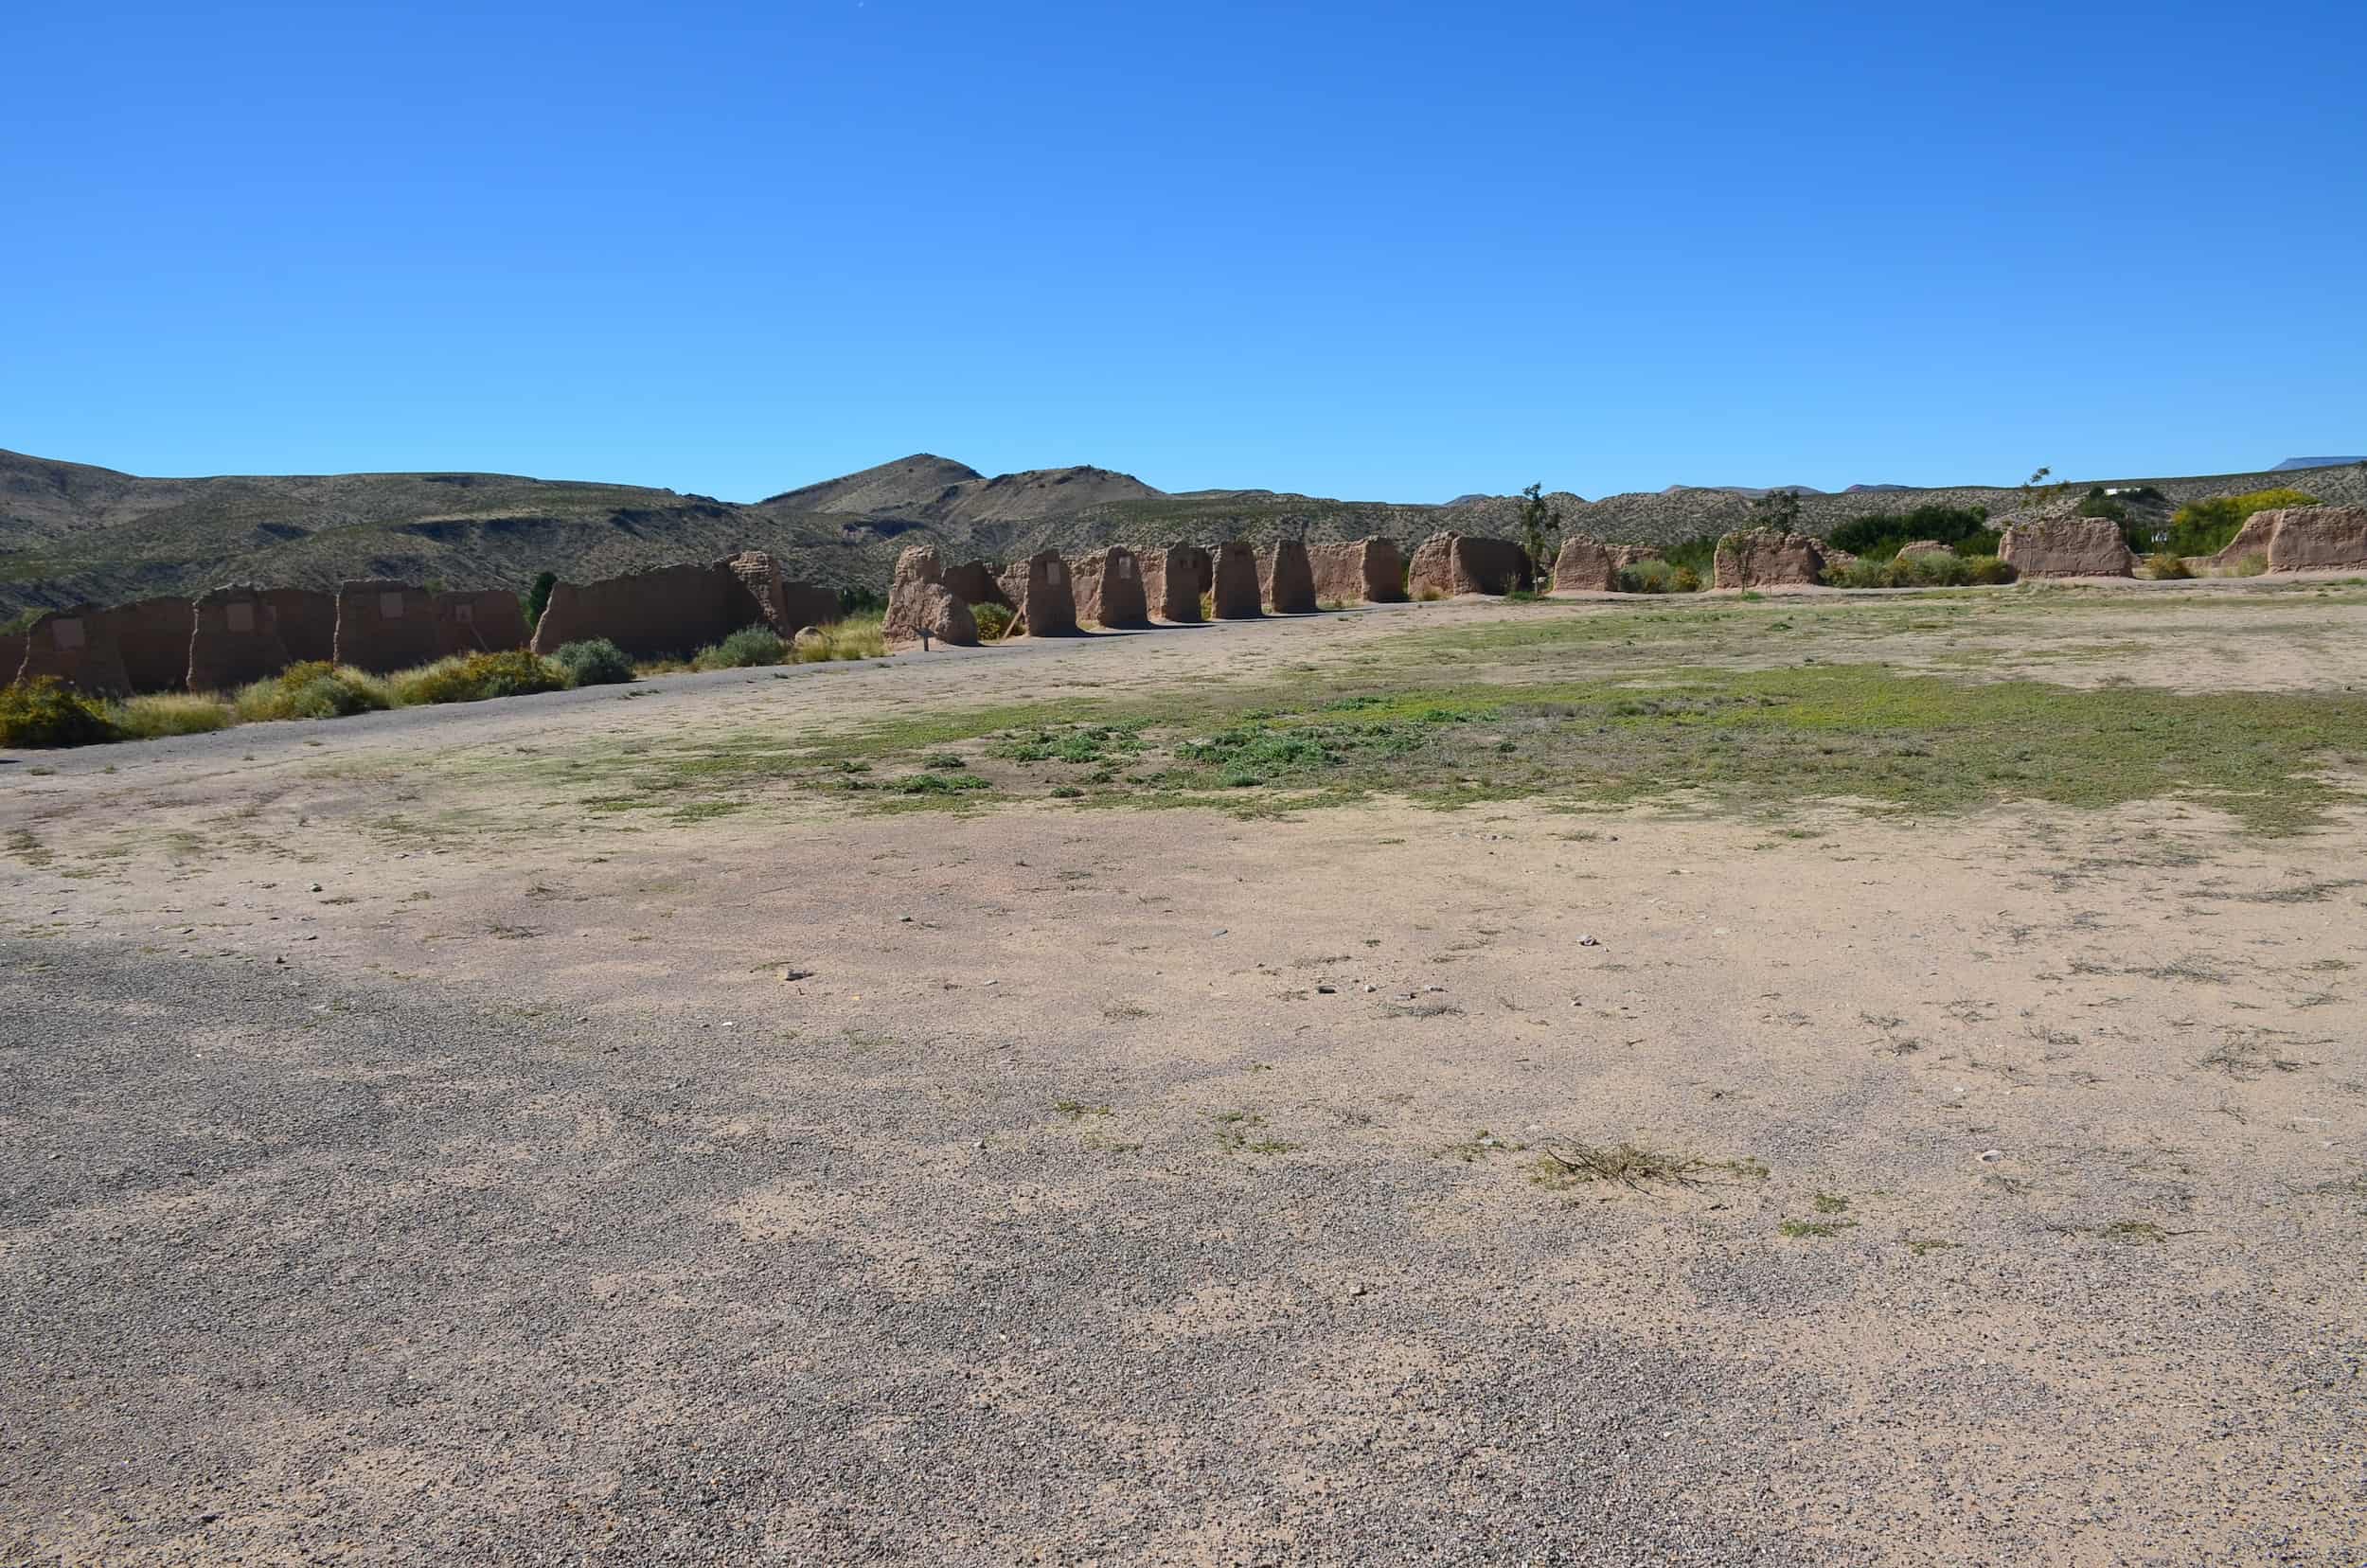 Parade Ground at Fort Selden Historic Site in New Mexico